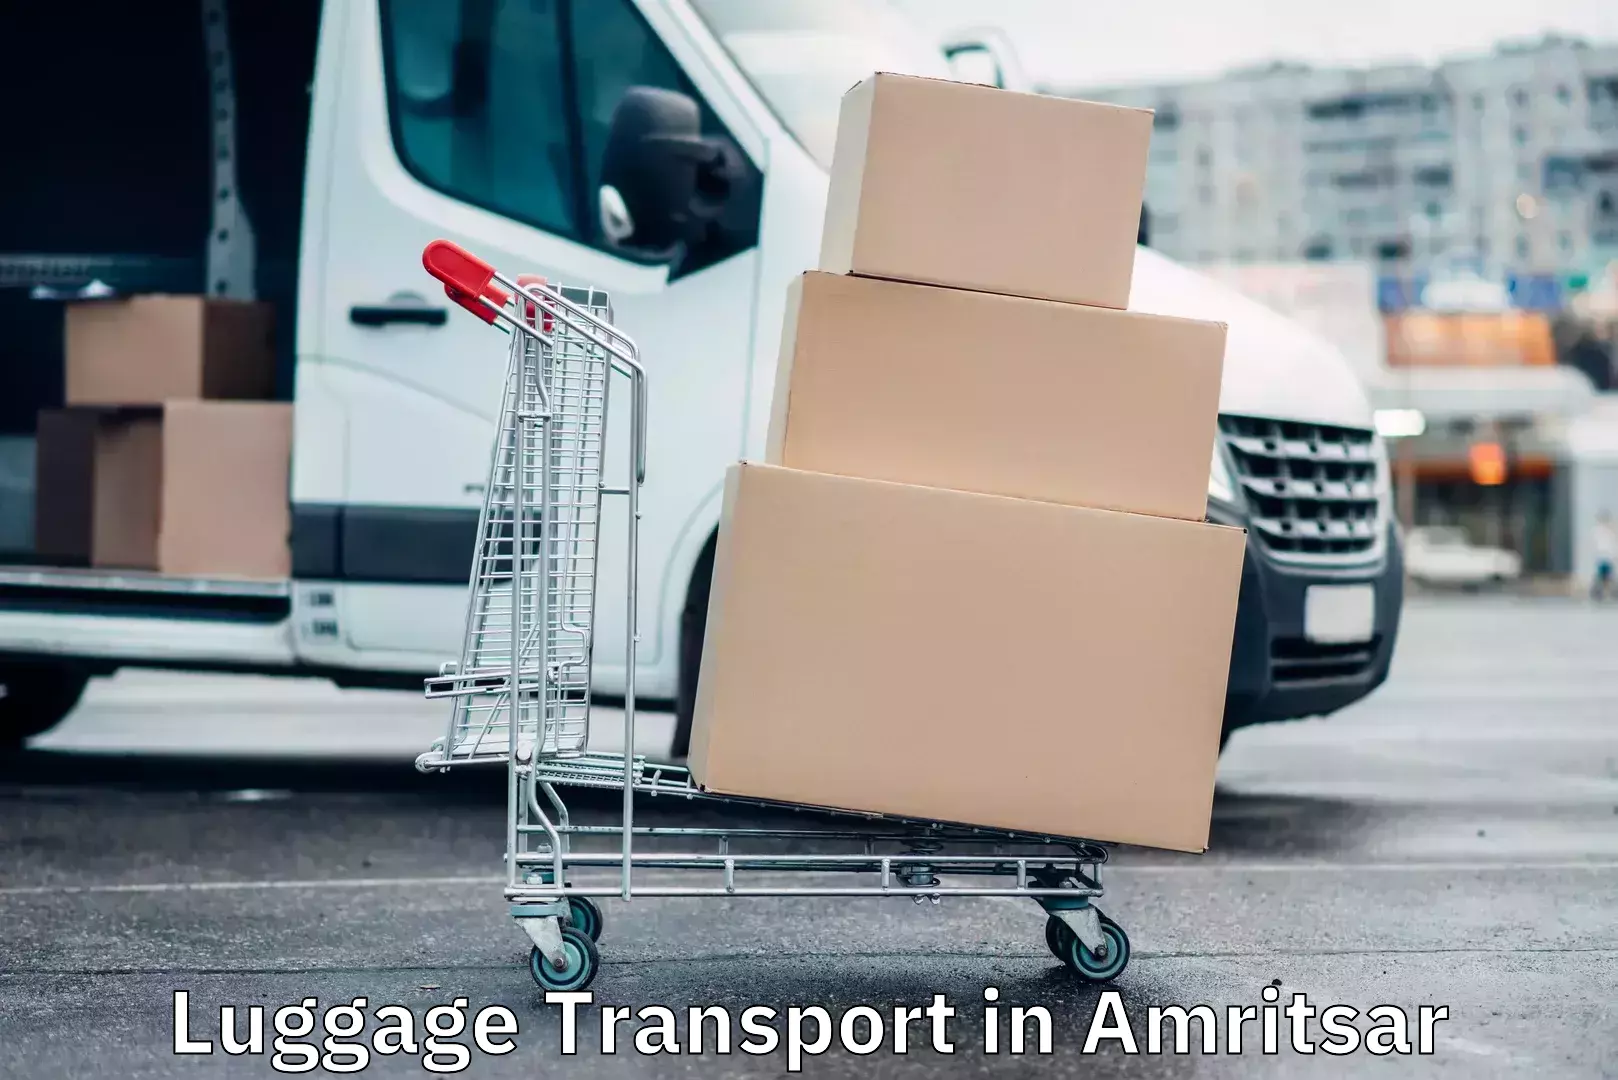 Baggage transport professionals in Amritsar